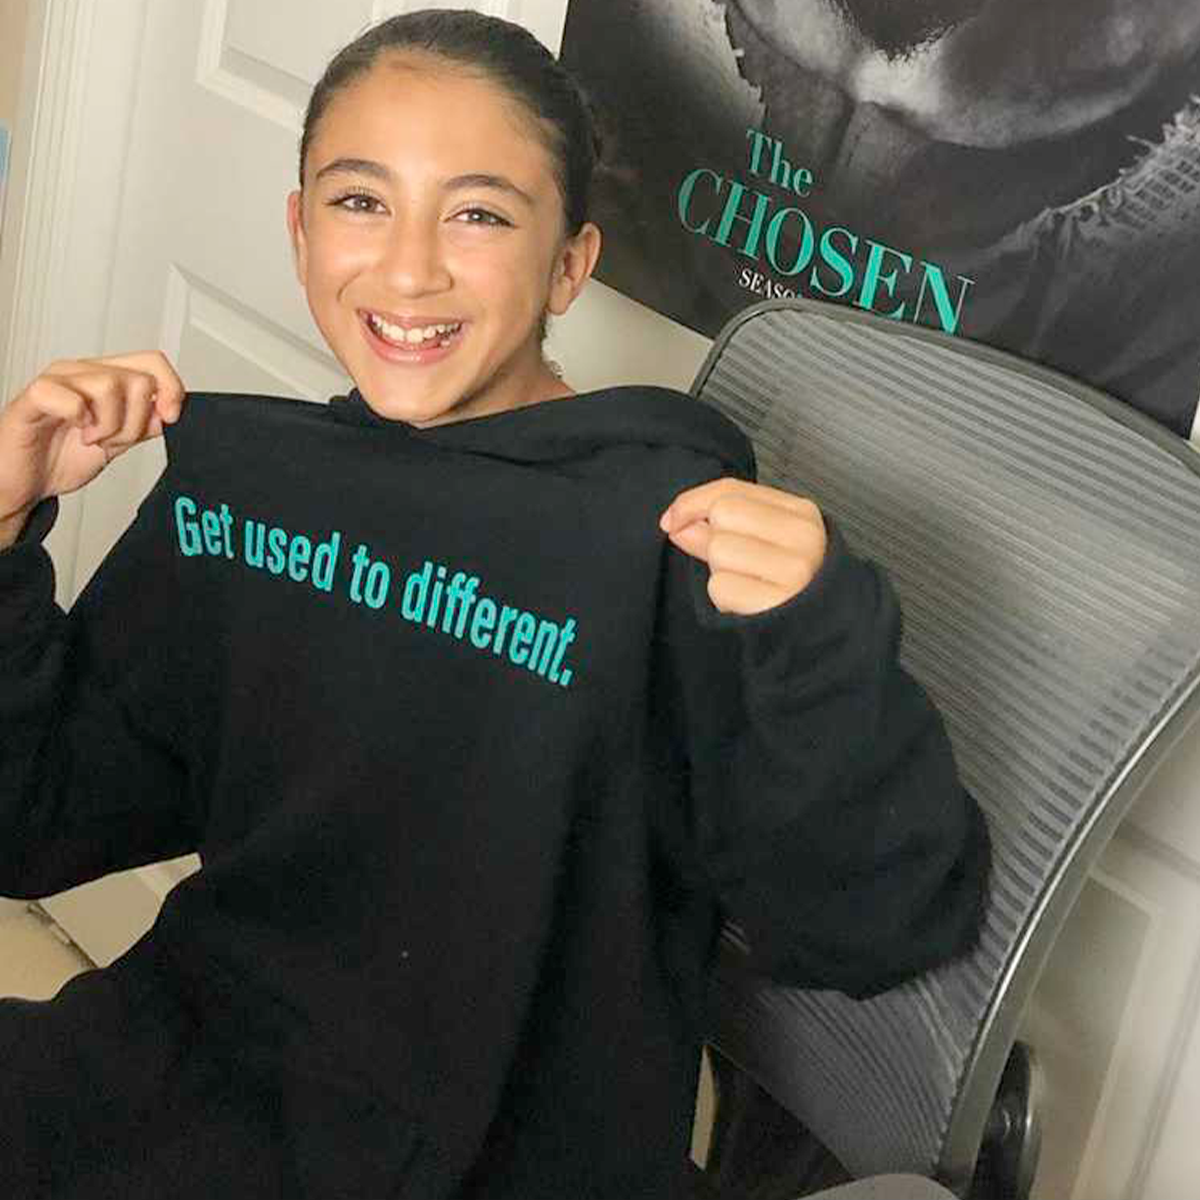 Get used to different Chosen Long Sleeve (Limited Edition) Girl